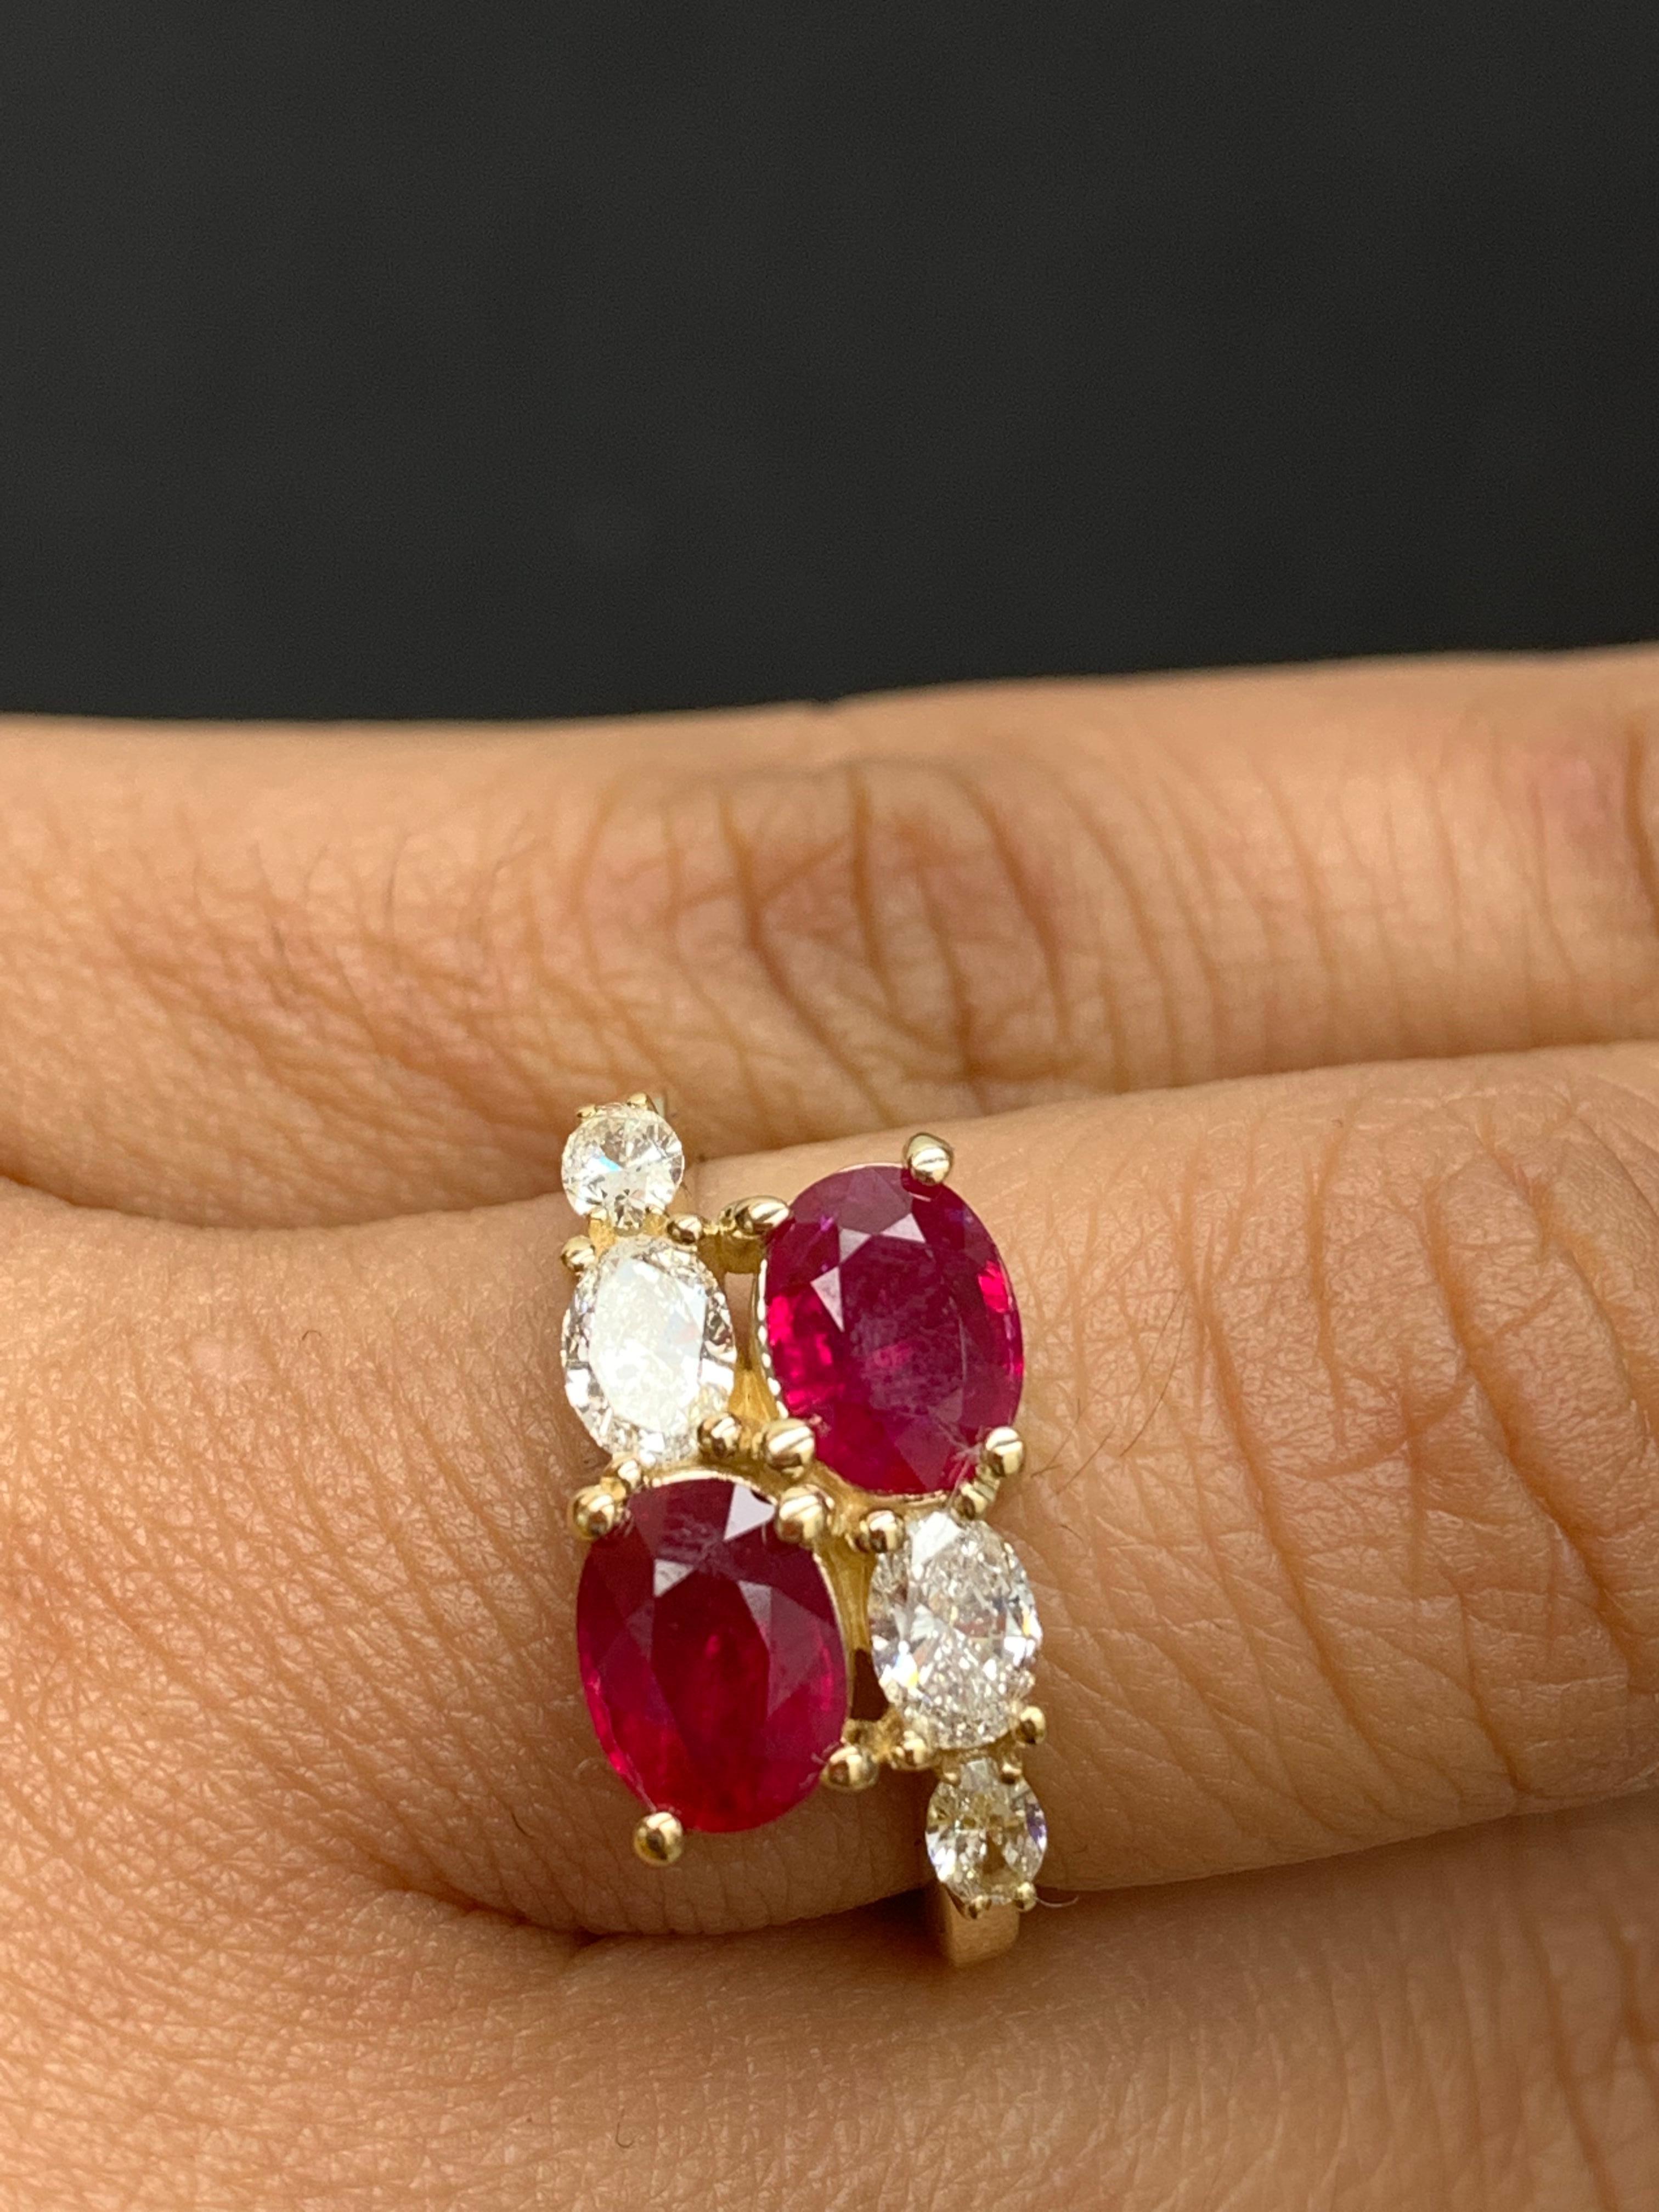 2.18 Carat Oval Cut Ruby Diamond Toi et Moi Engagement Ring in 14K Yellow Gold For Sale 2